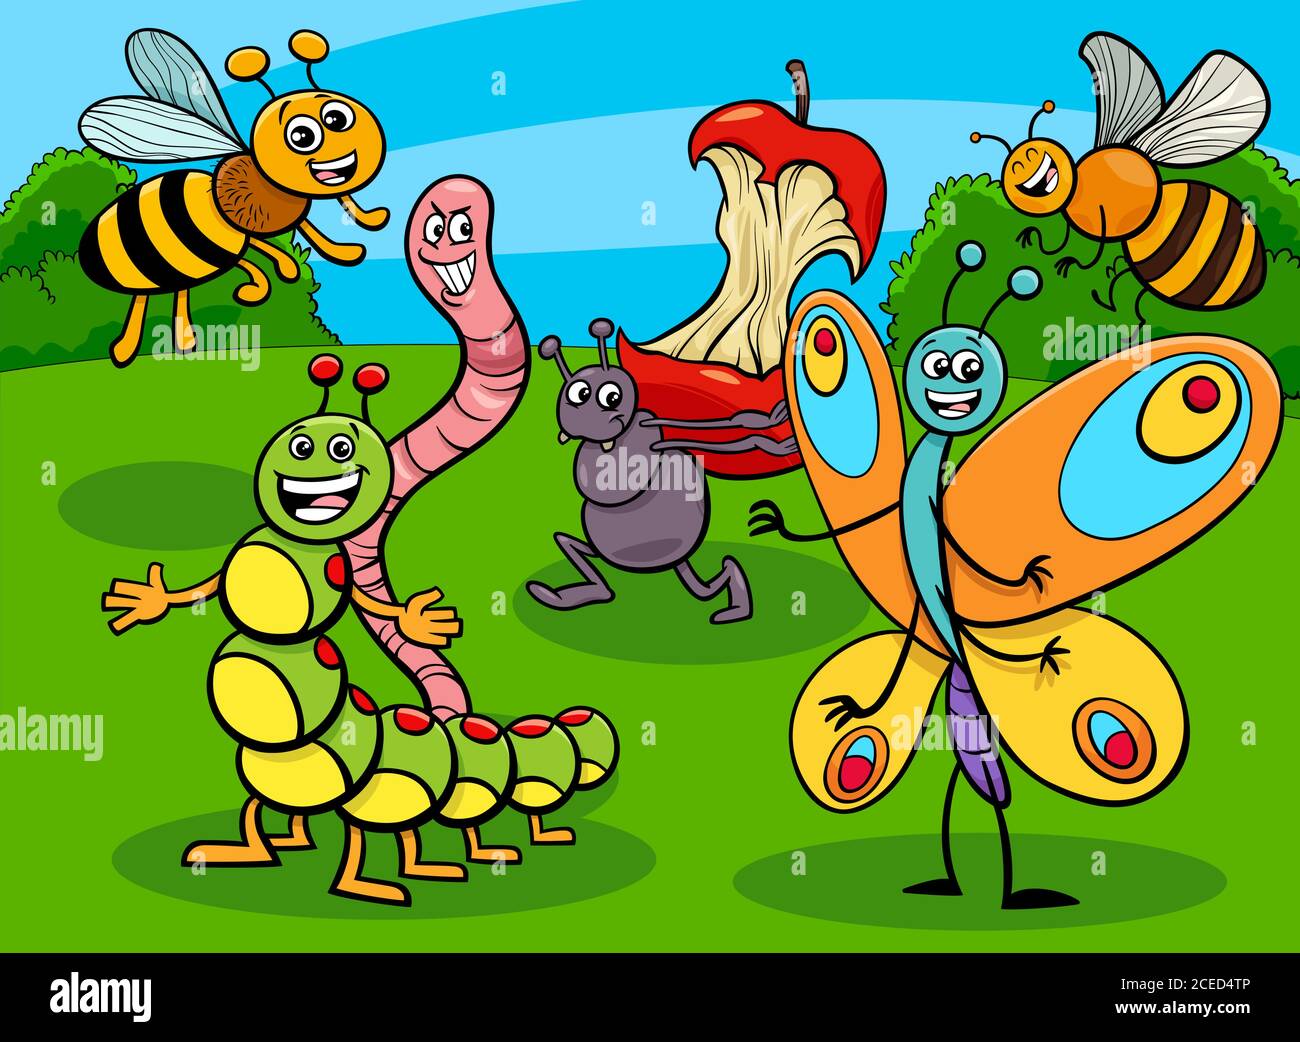 Cartoon Illustration of Funny Insects and Bugs Animal Characters Group Stock Vector